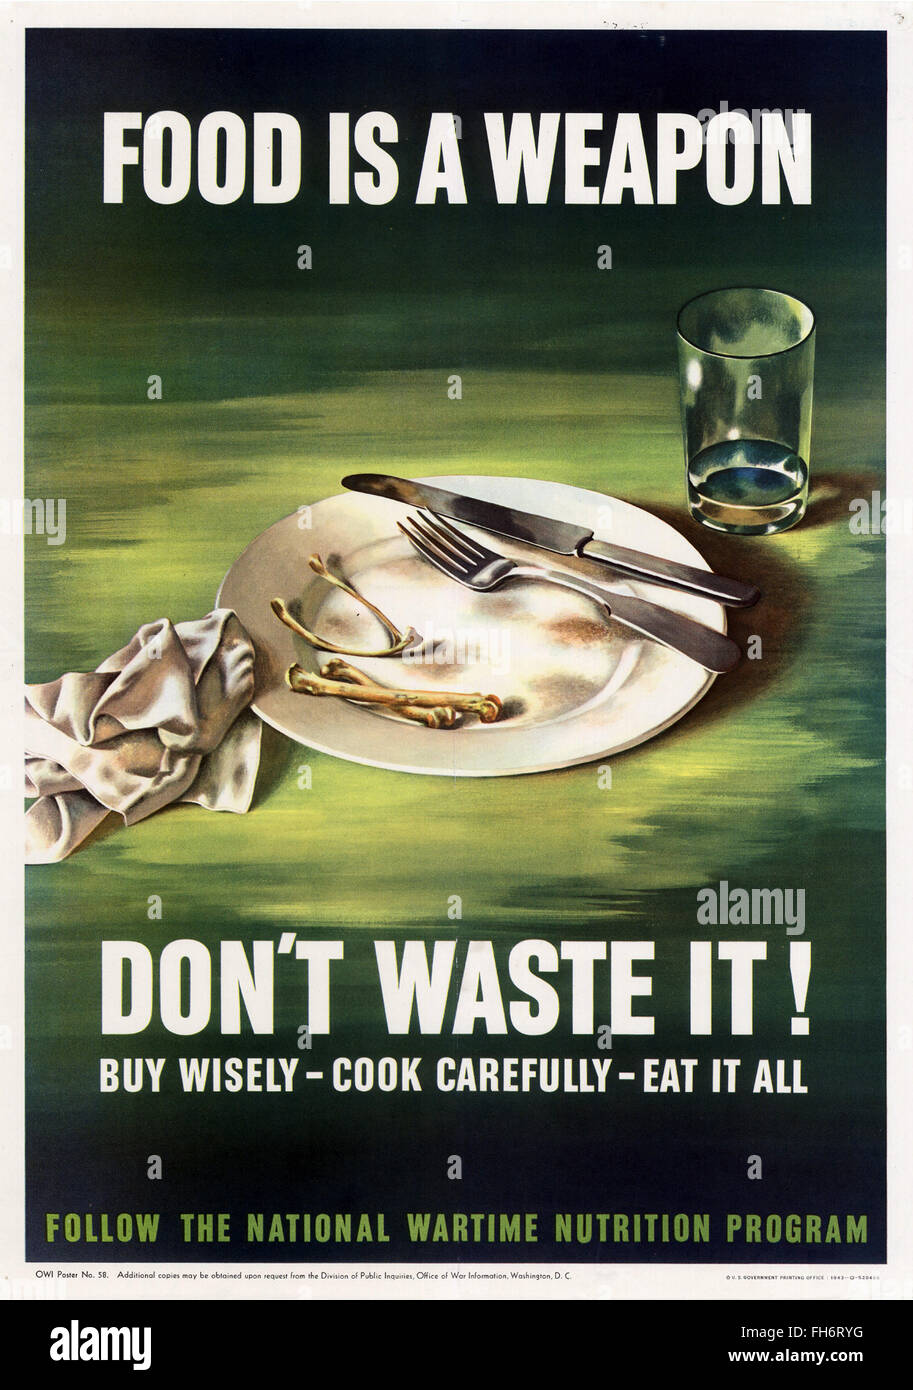 Rationing food is a weapon- US Propaganda Poster - WWII Stock Photo